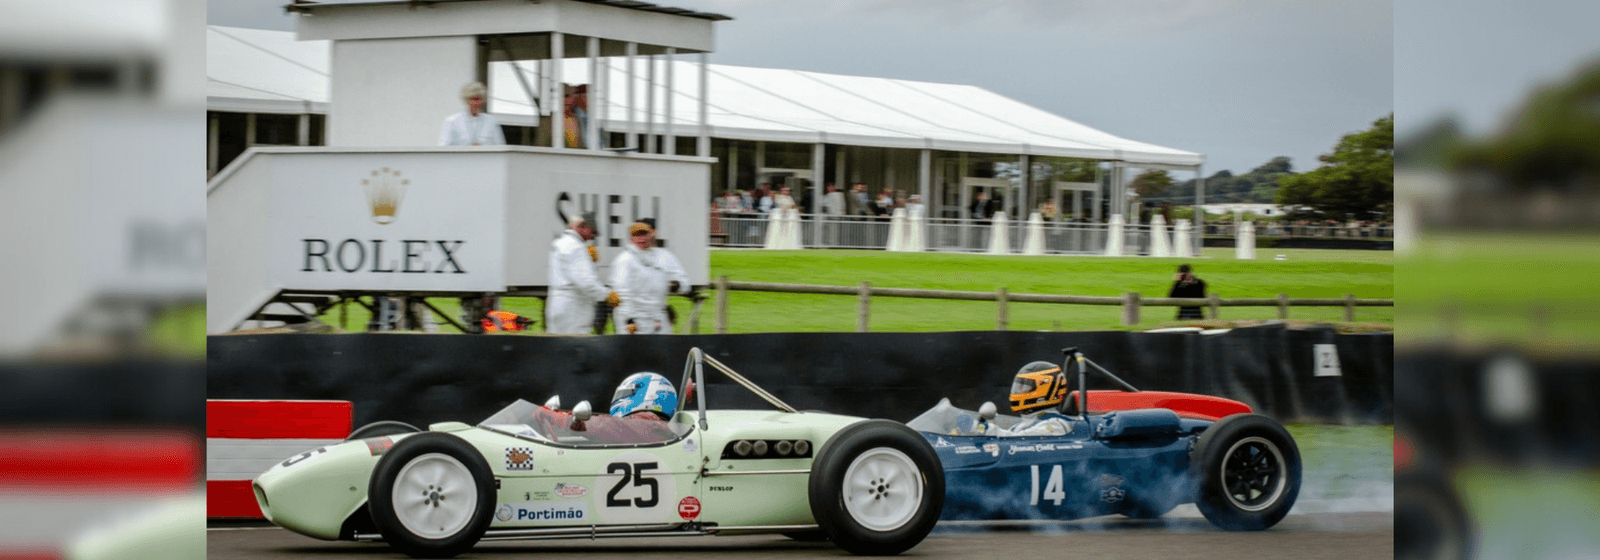 Rolex Celebrates 25 Years As Official Timepiece Of The Goodwood Revival